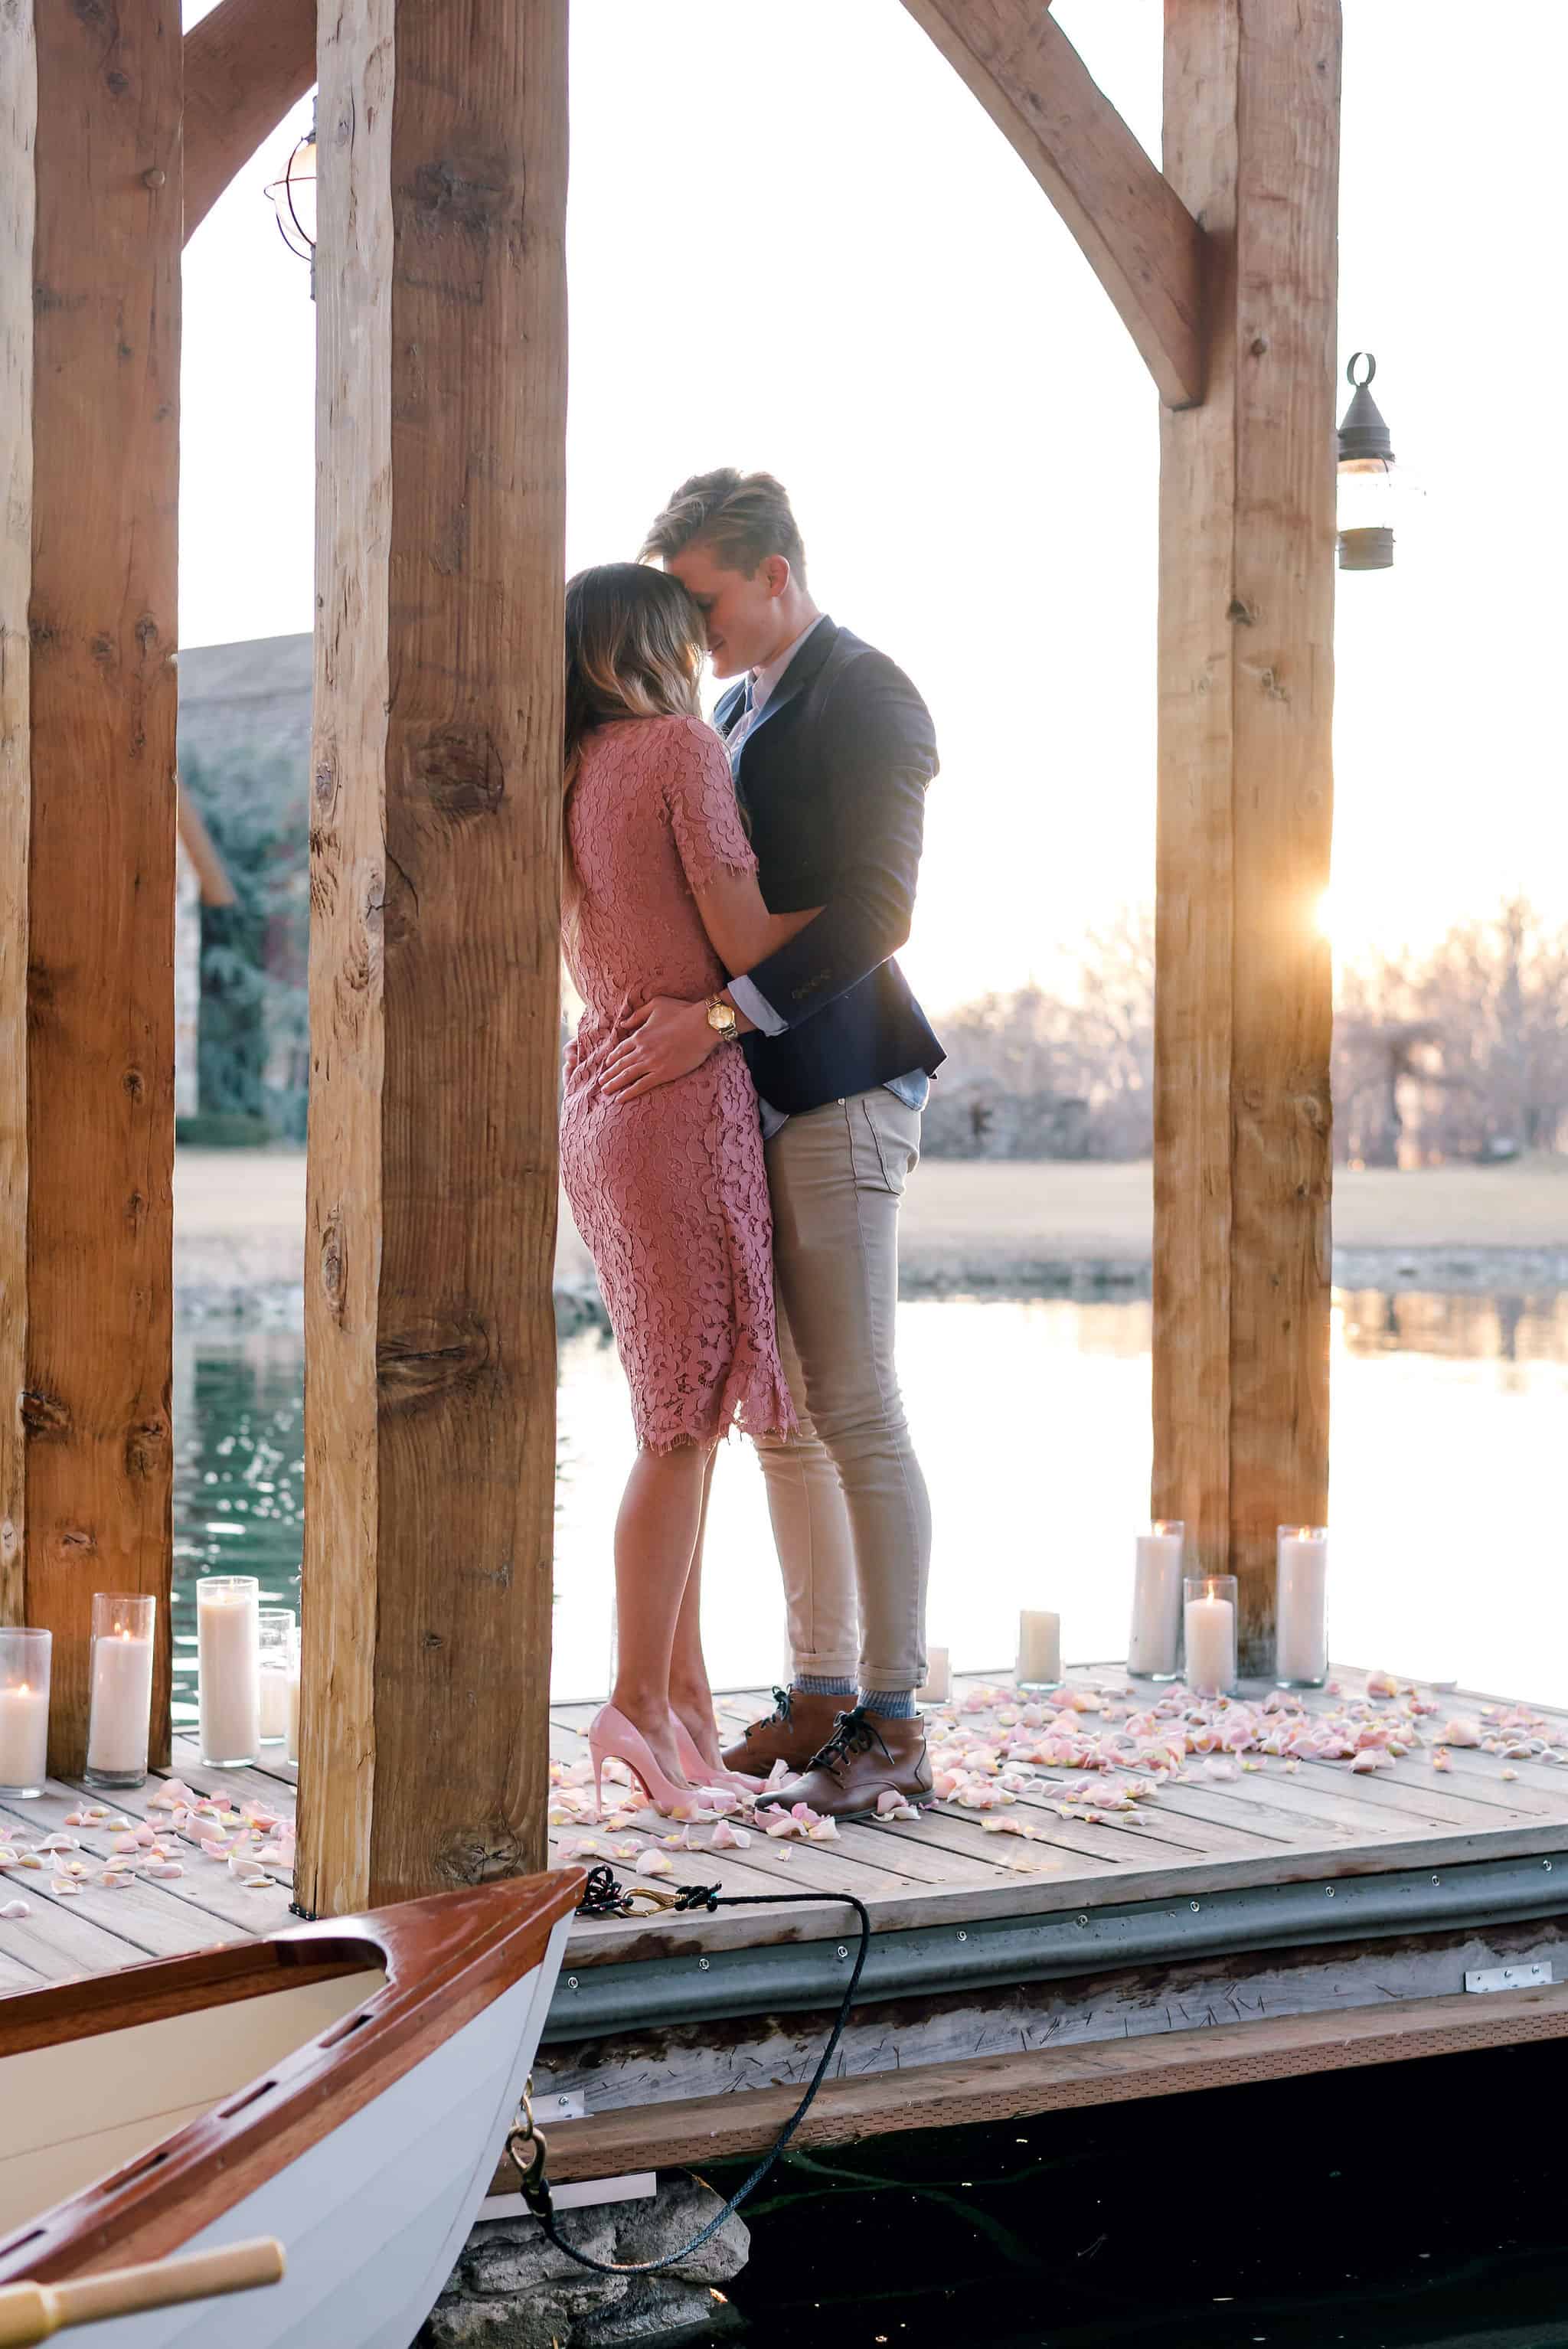 Stunning proposal on a dock scattered with flower petals and candles, the couple embrace next to a boat as the sun sets